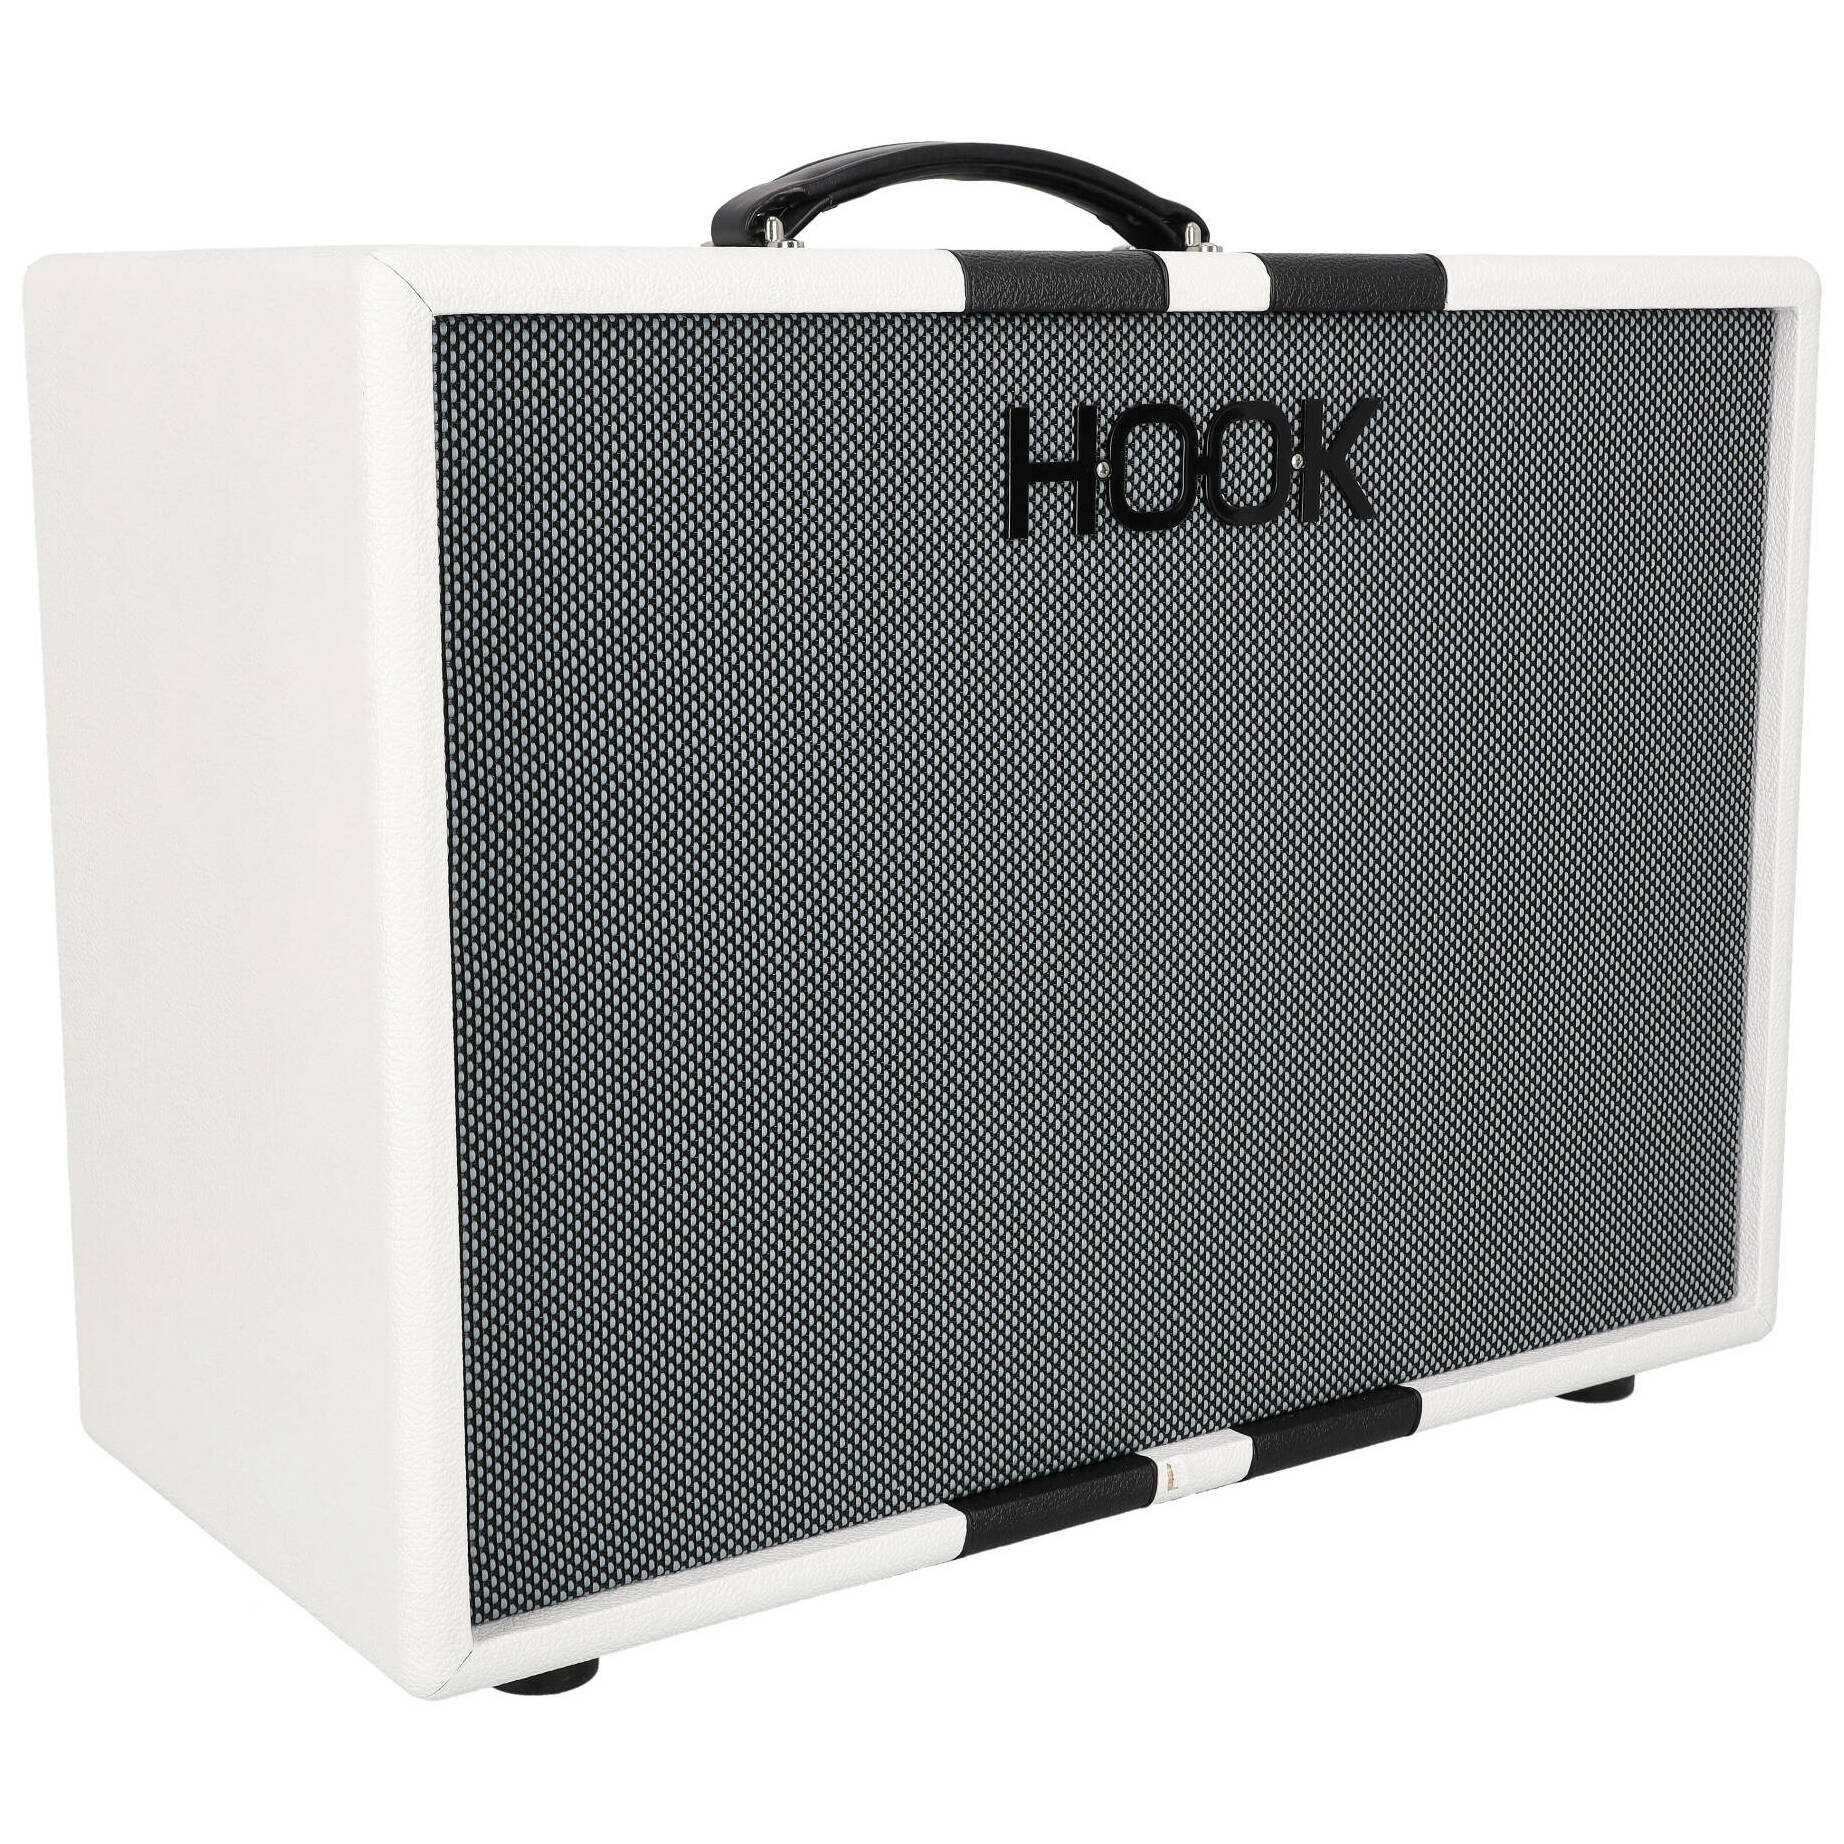 Hook Amplification 1x12 Wizard Cabinet WGS Oval White Black Stripes